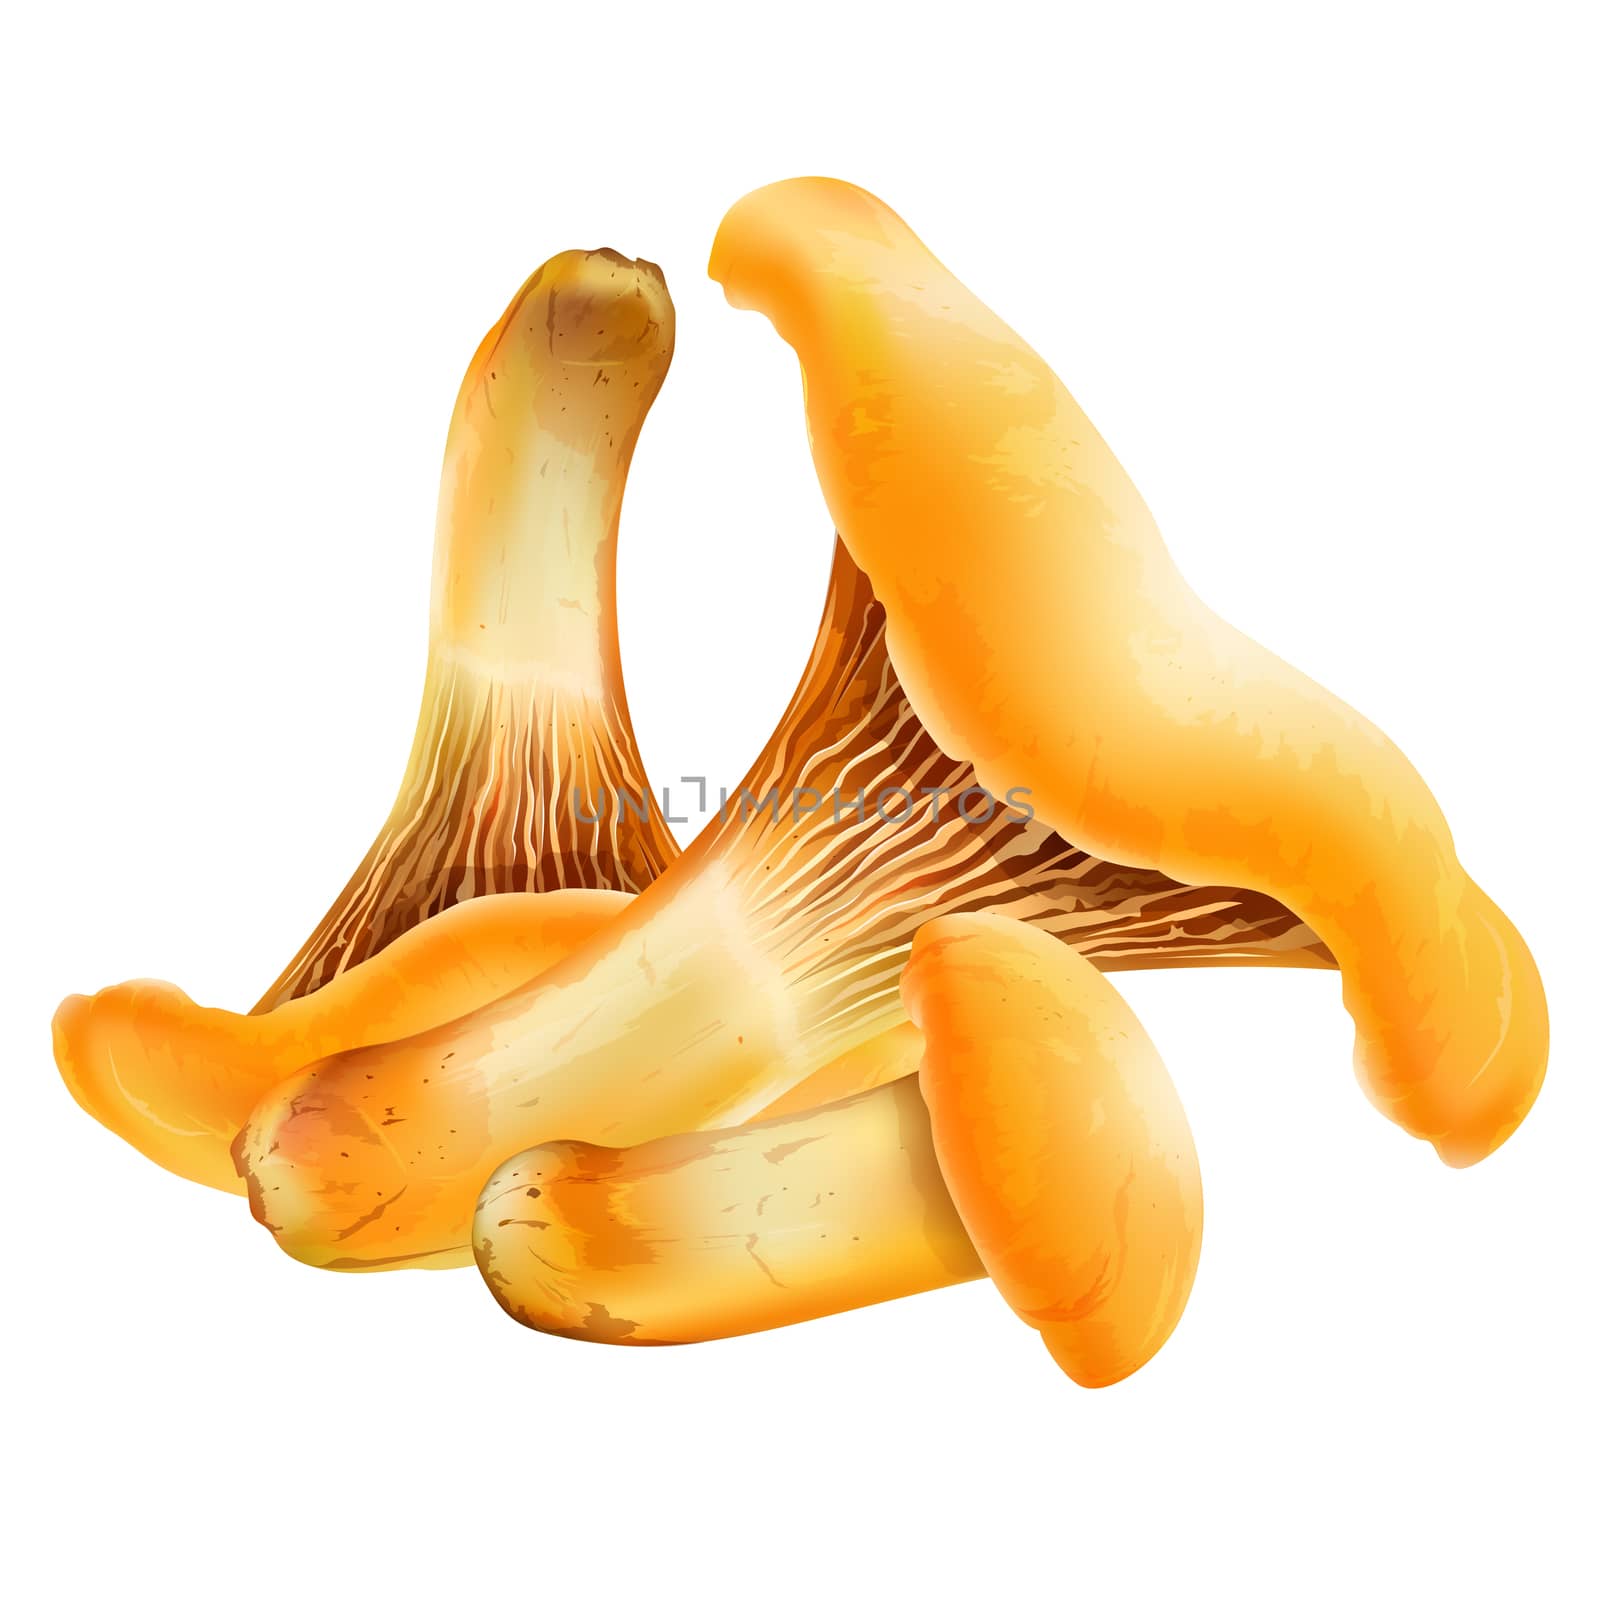 Chanterelles on white background by ConceptCafe